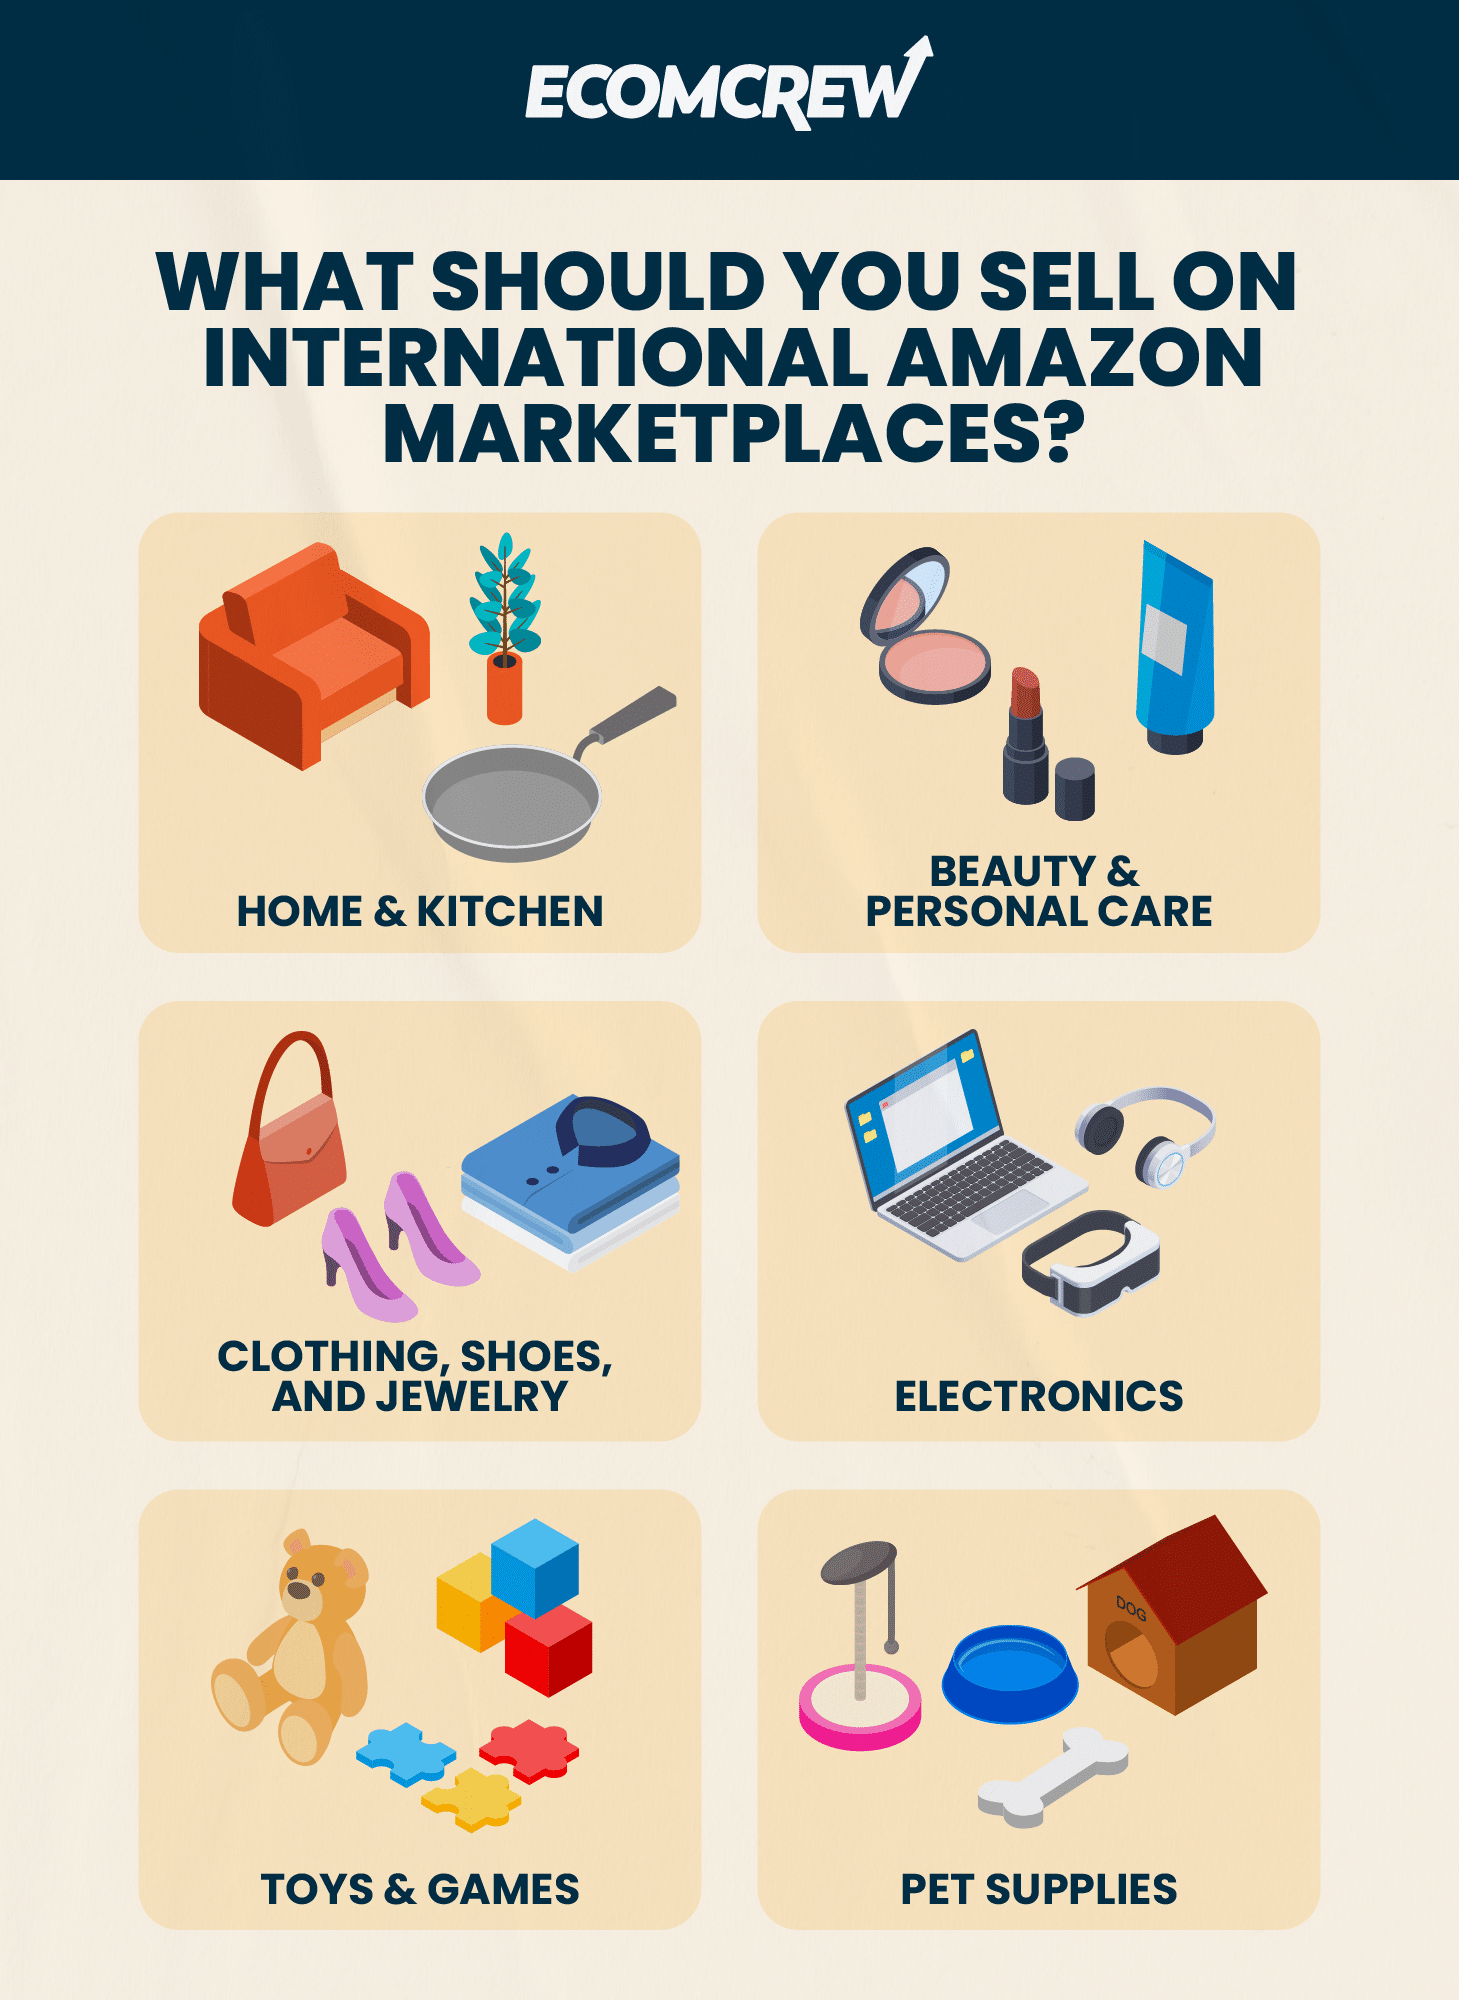 list of categories sellers should sell internationally on Amazon